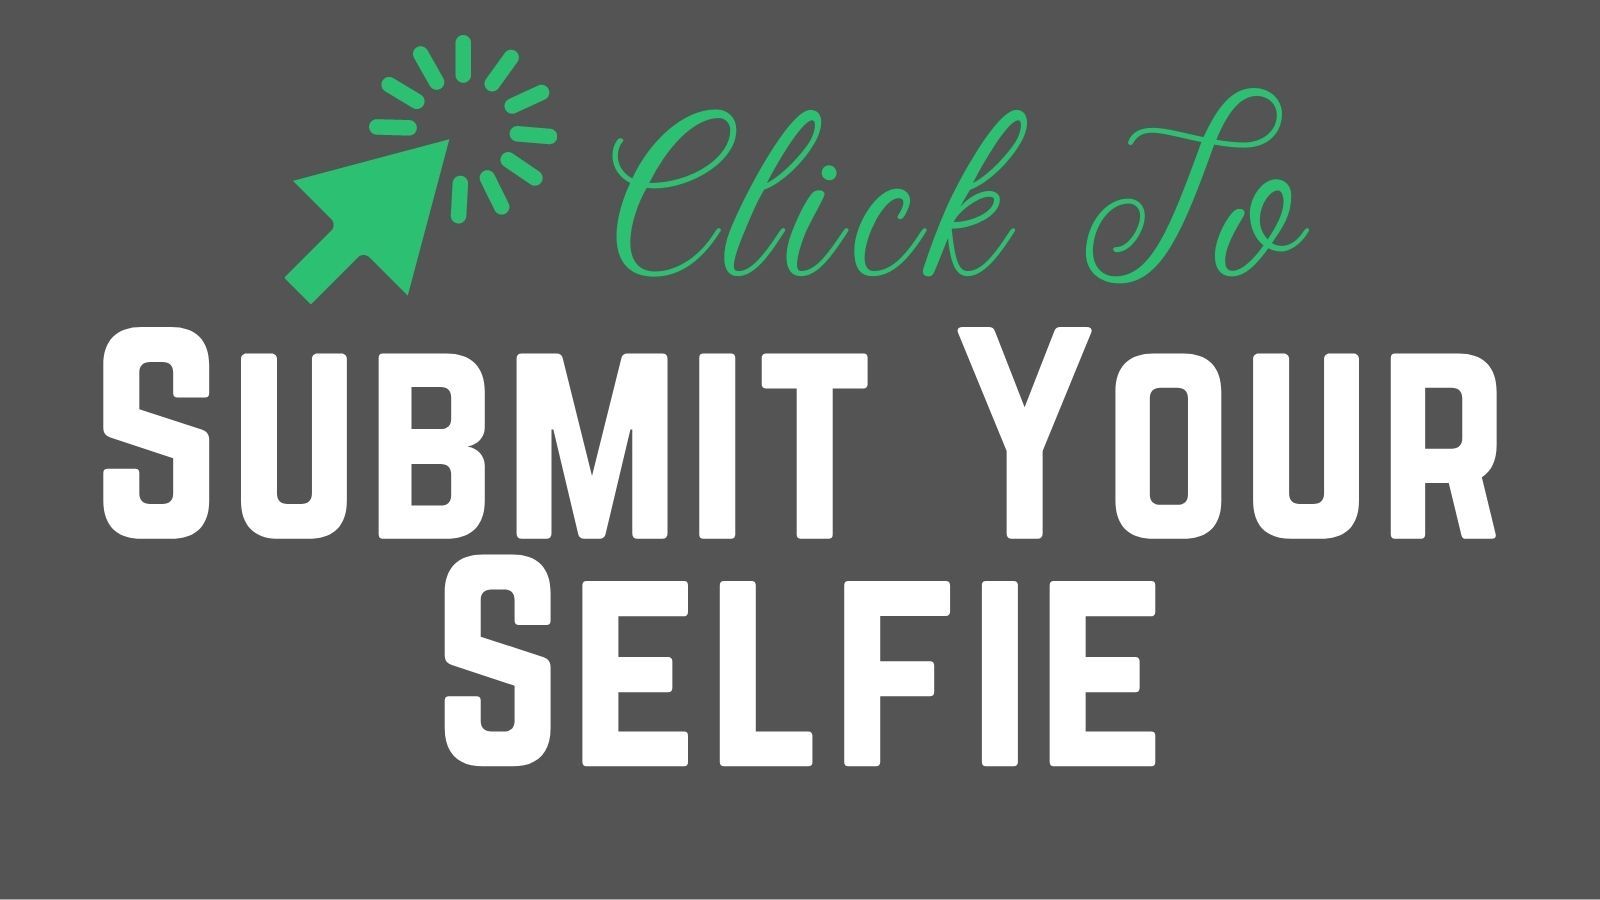 Submit your selfie button